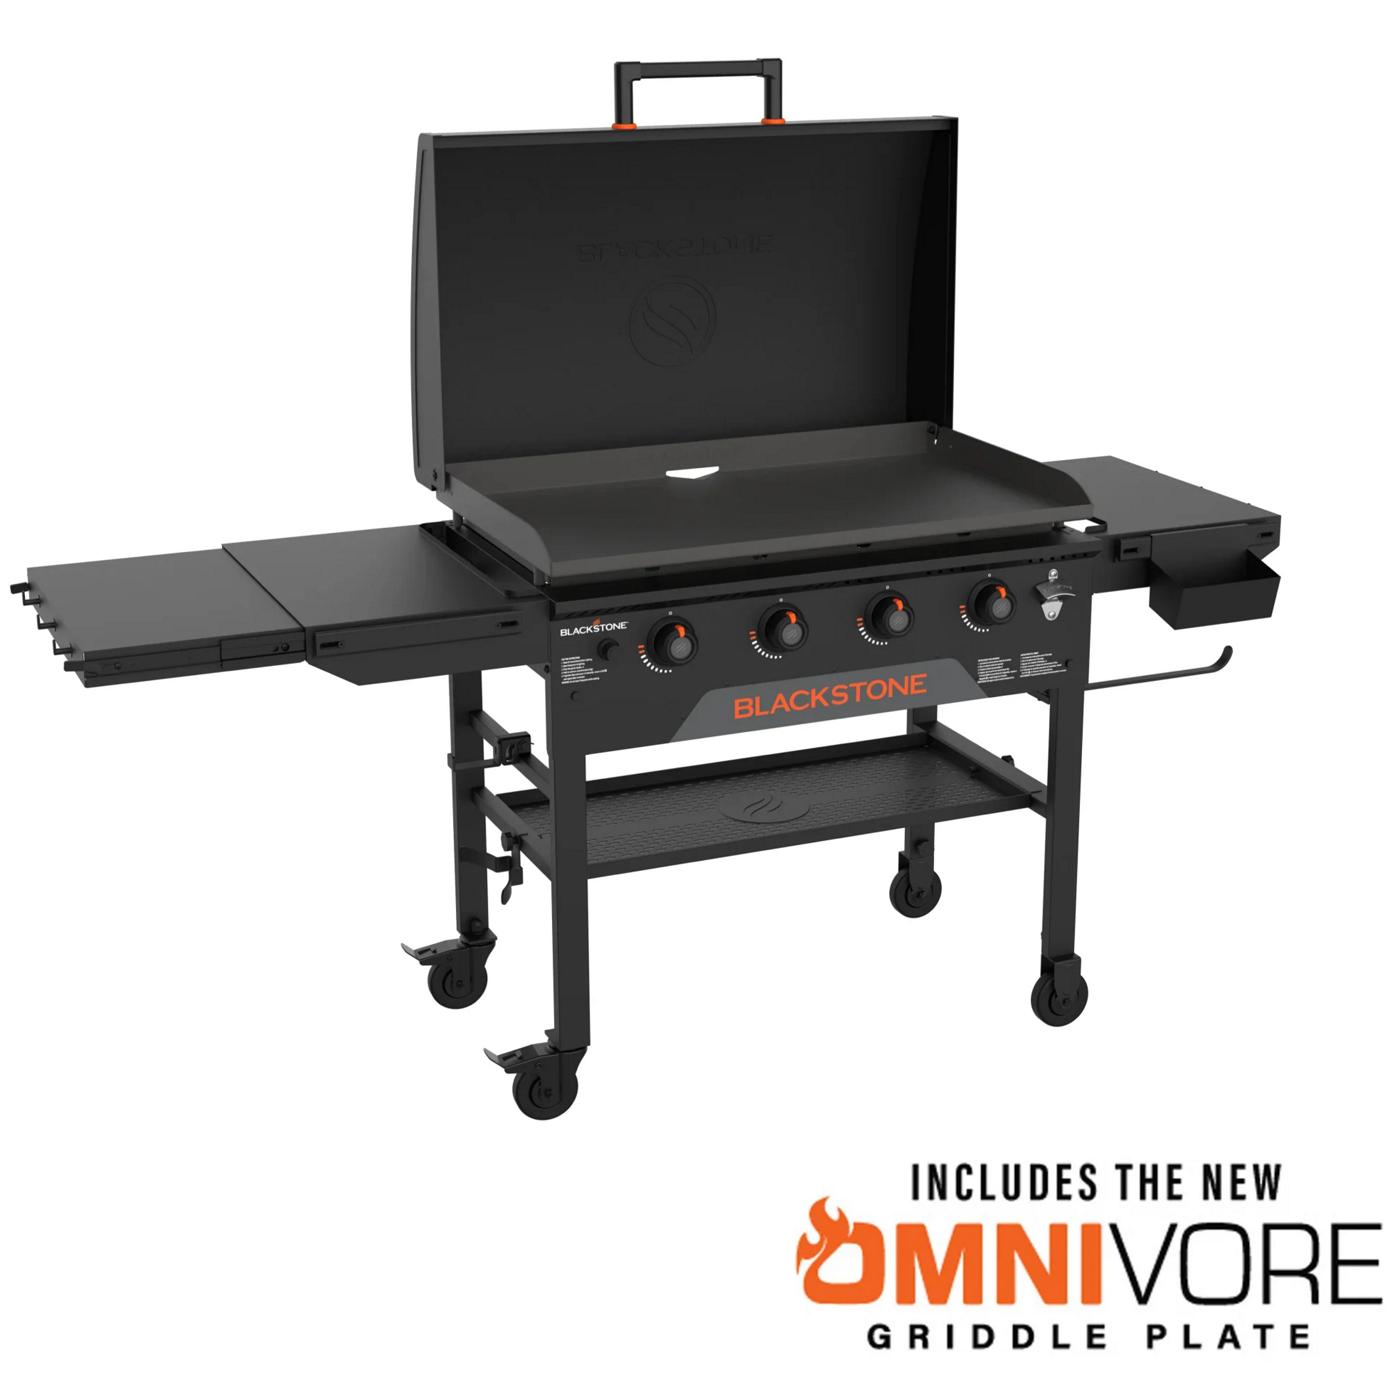 Blackstone Omnivore Griddle with Hood; image 7 of 8